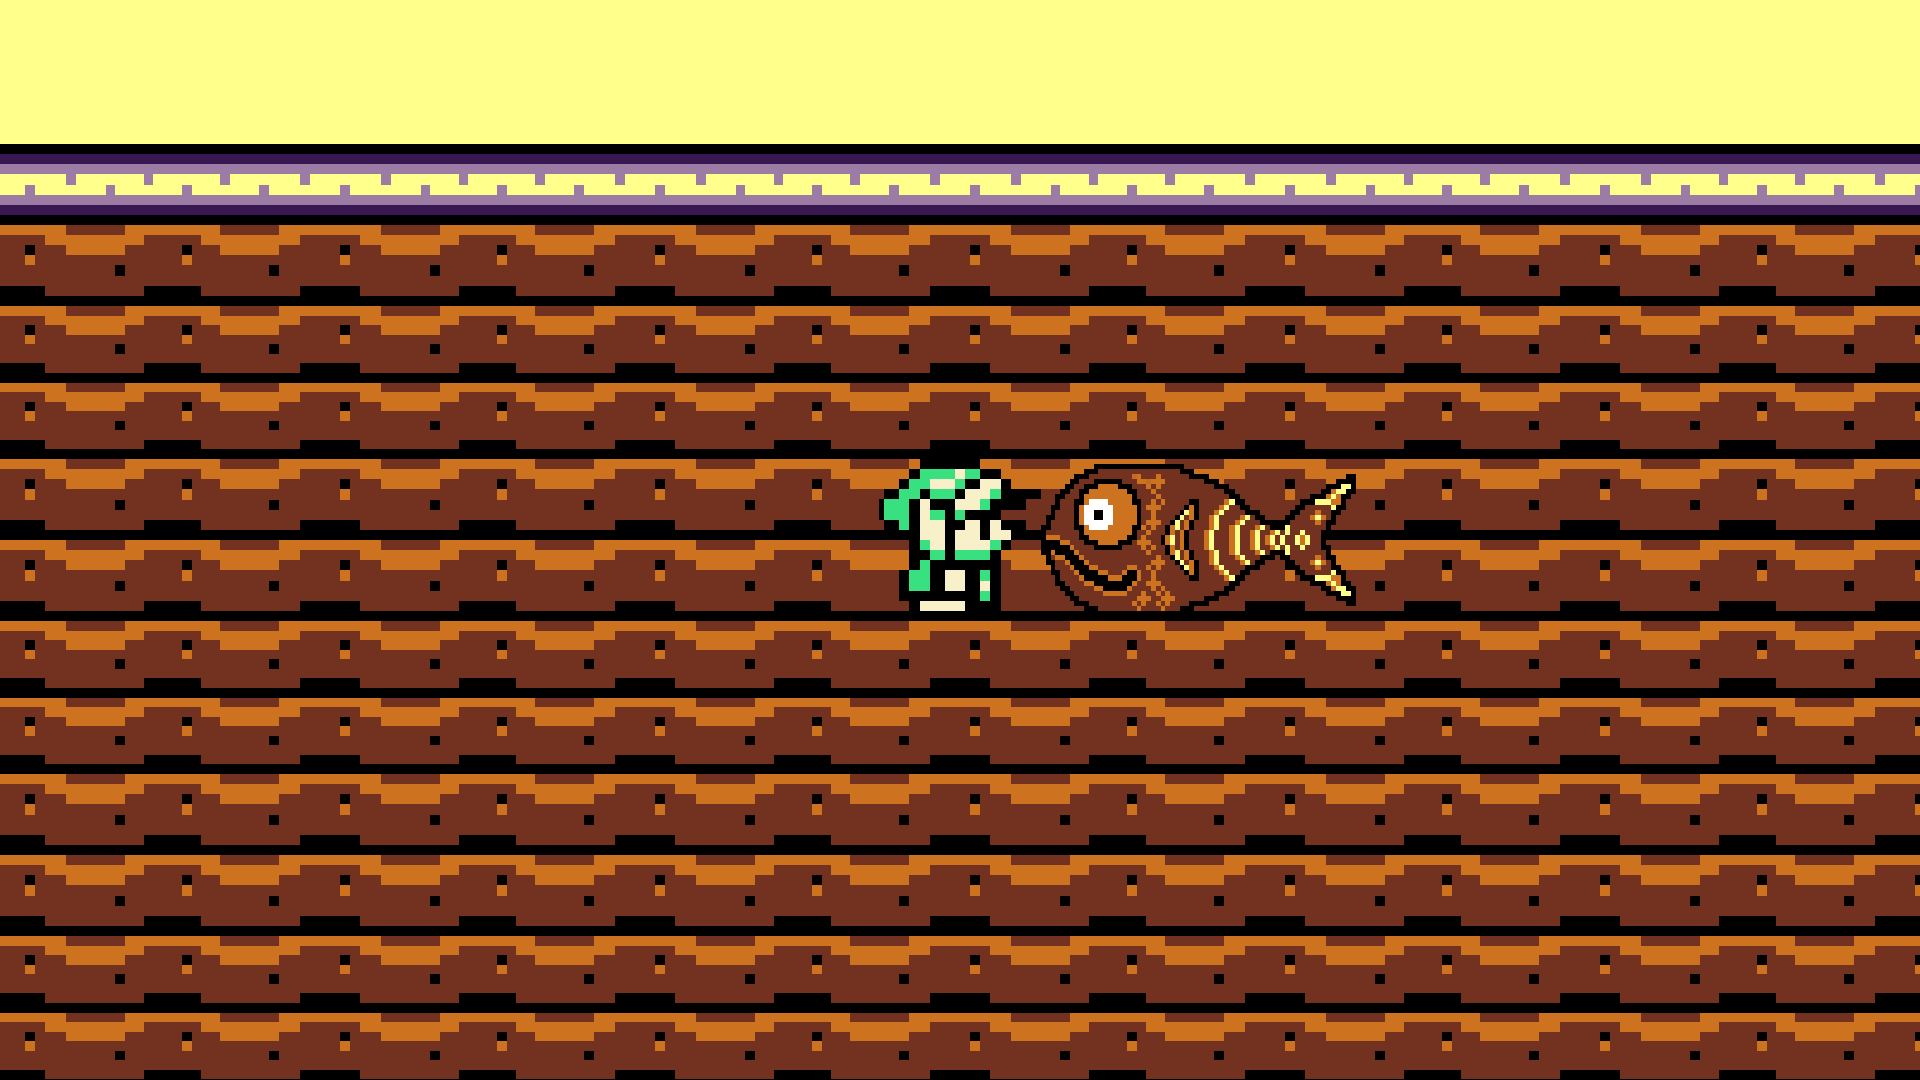 Player standing in front of the fish